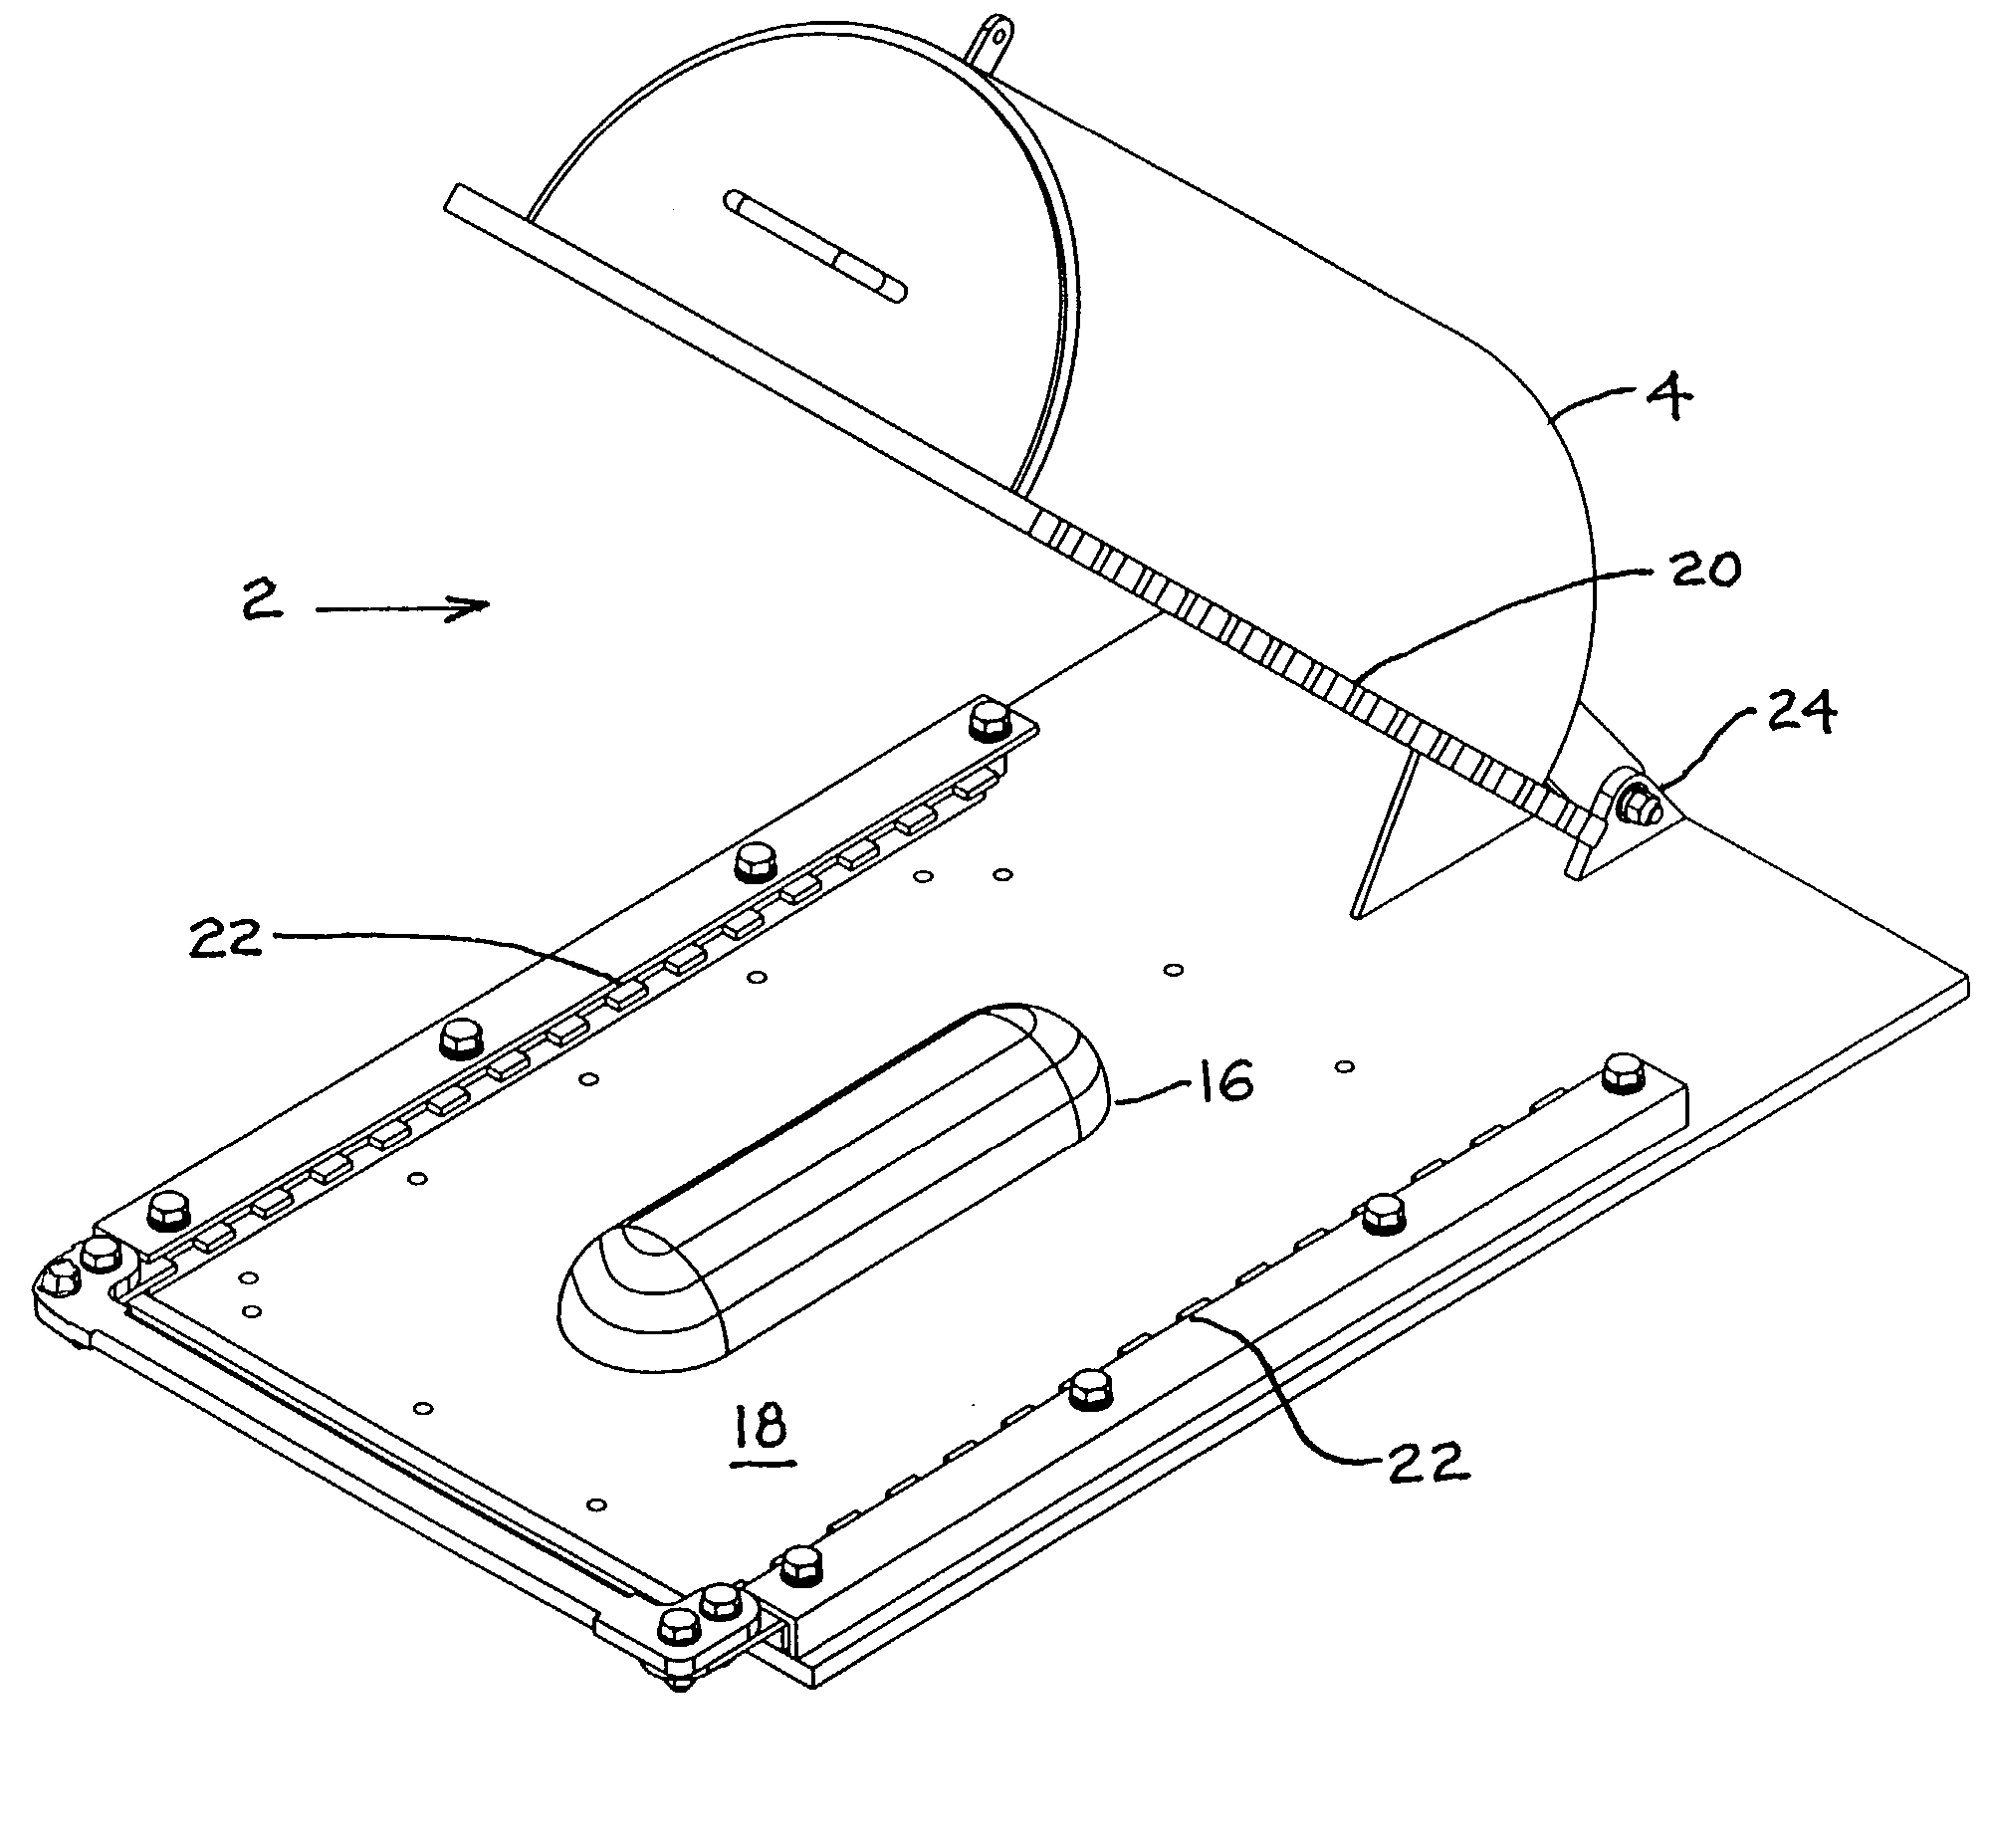 Rapid thermoform pressure forming process and apparatus